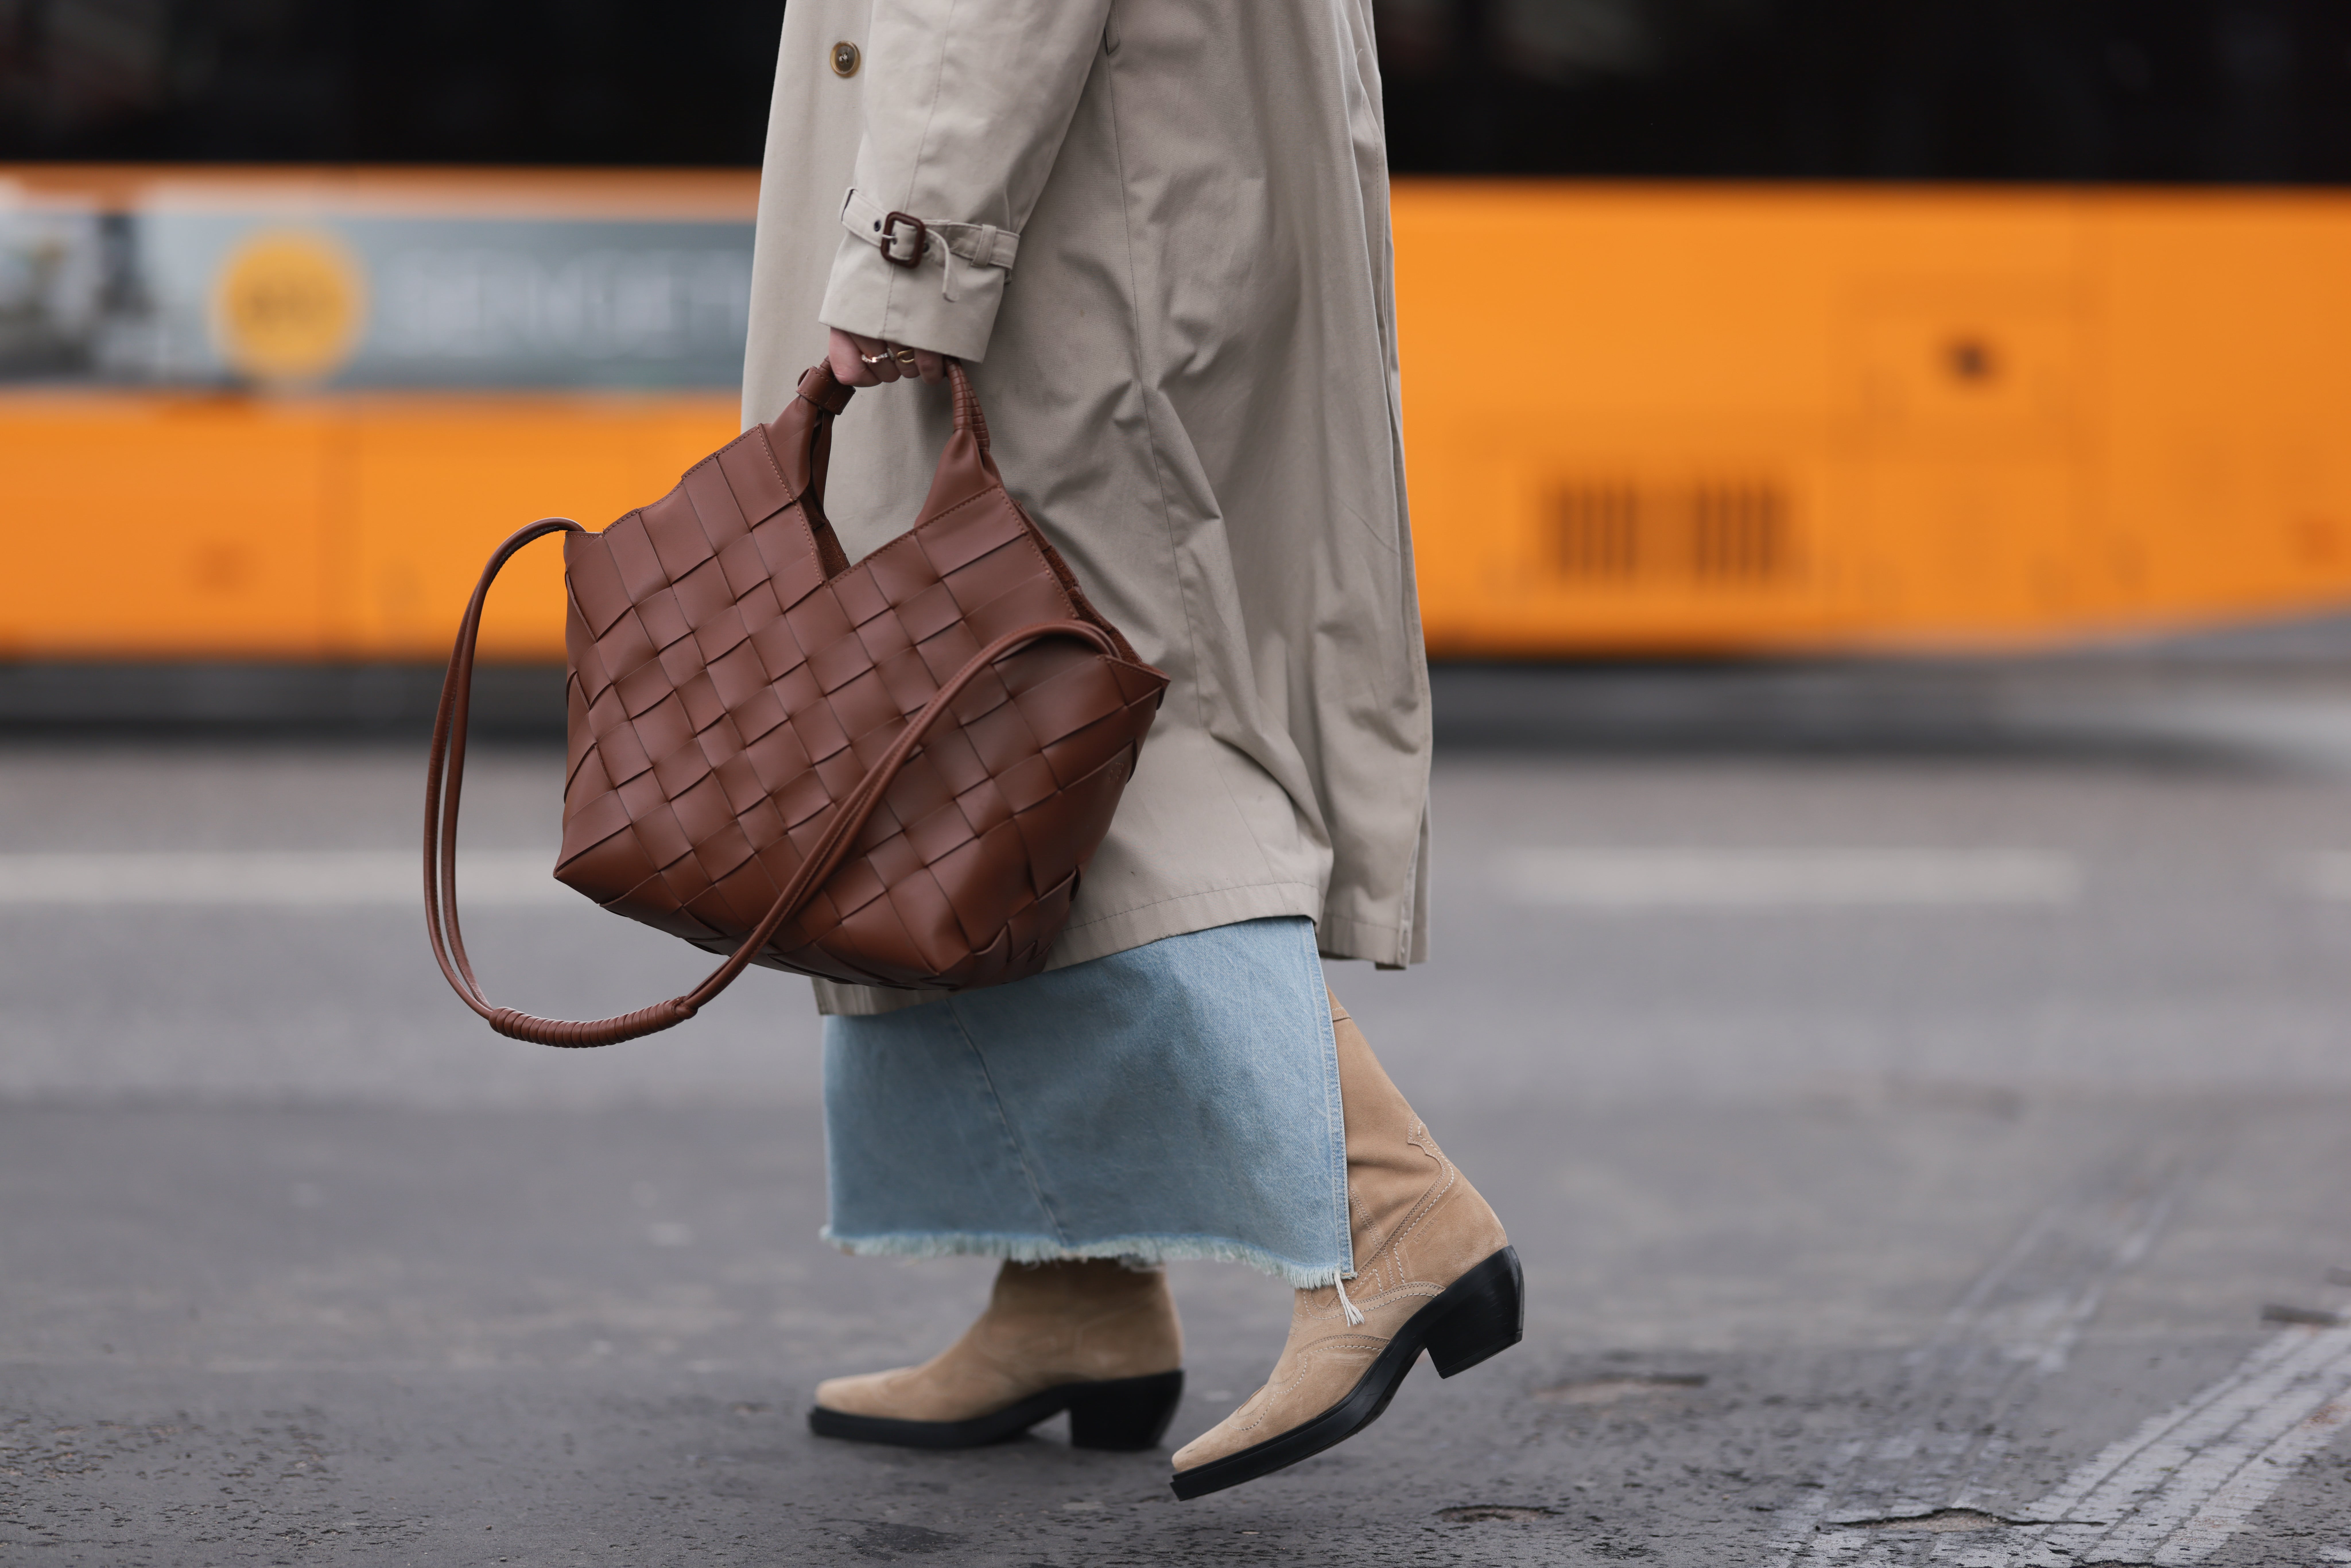 30 Best Crossbody Bags In 2023 For Trendy Women, Travel And More